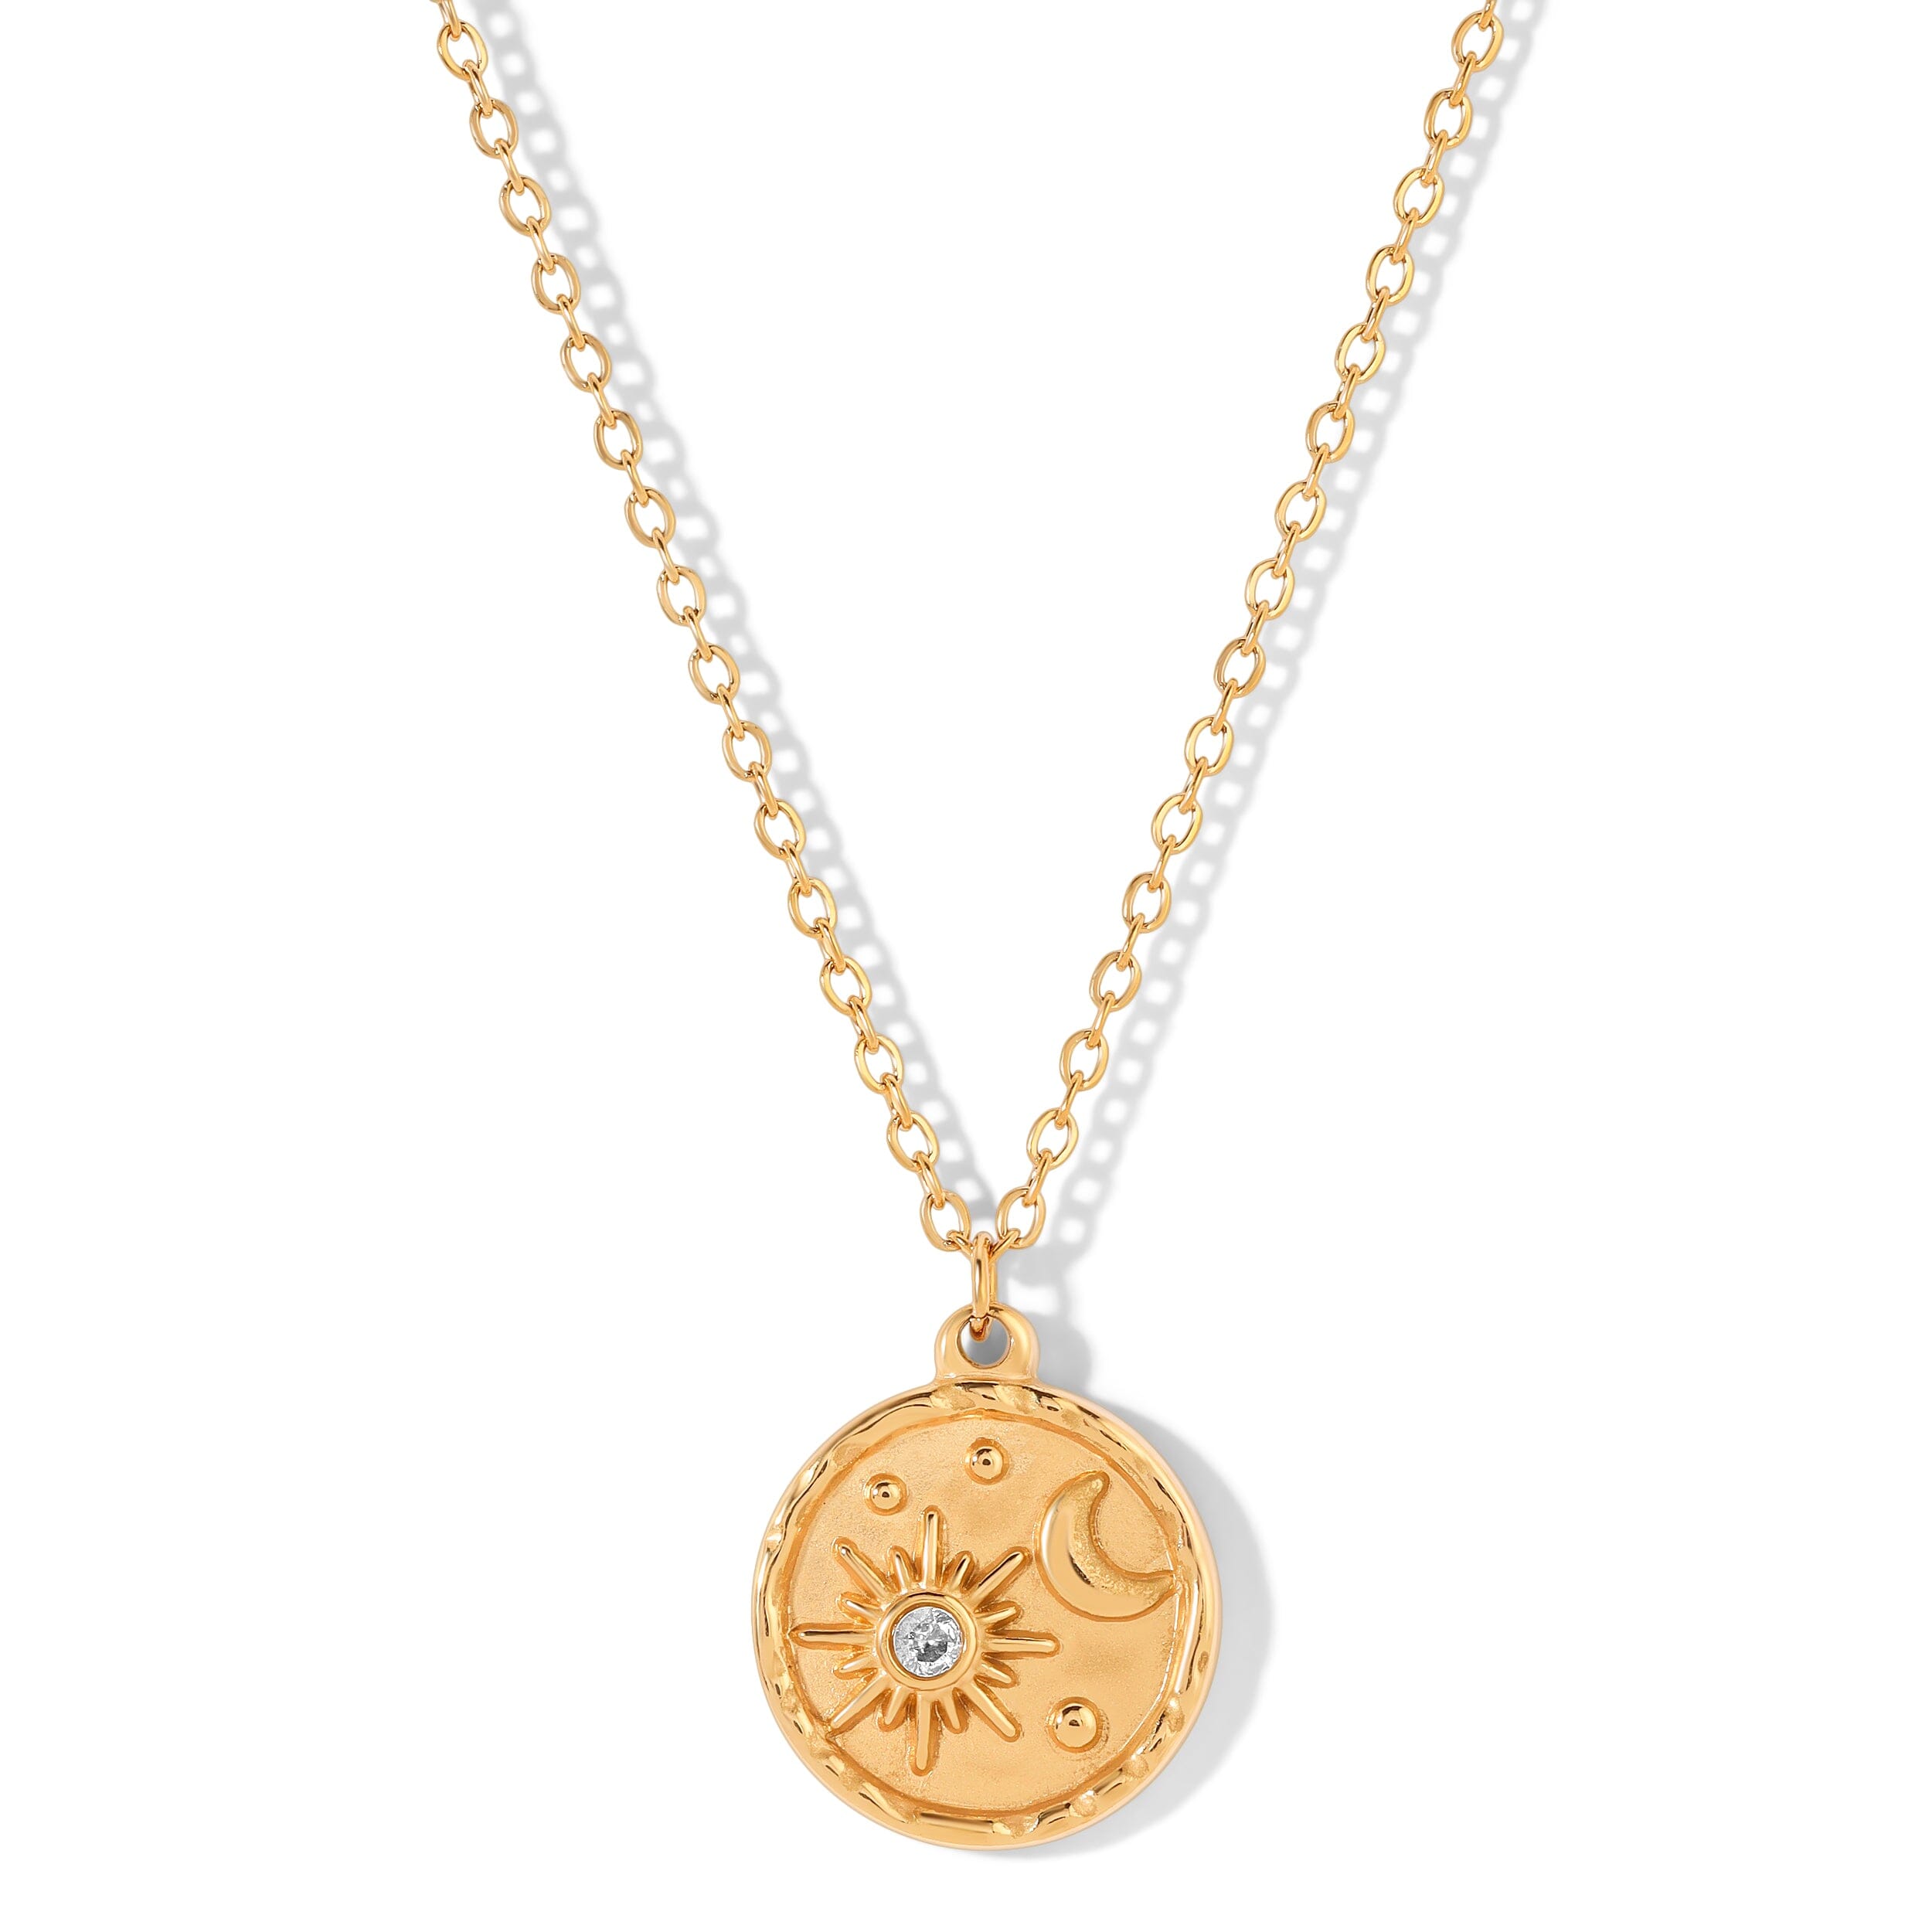 Celestial Moon and Sun Round Pendant With Chain Necklace with Pendant Bloo & Ro 